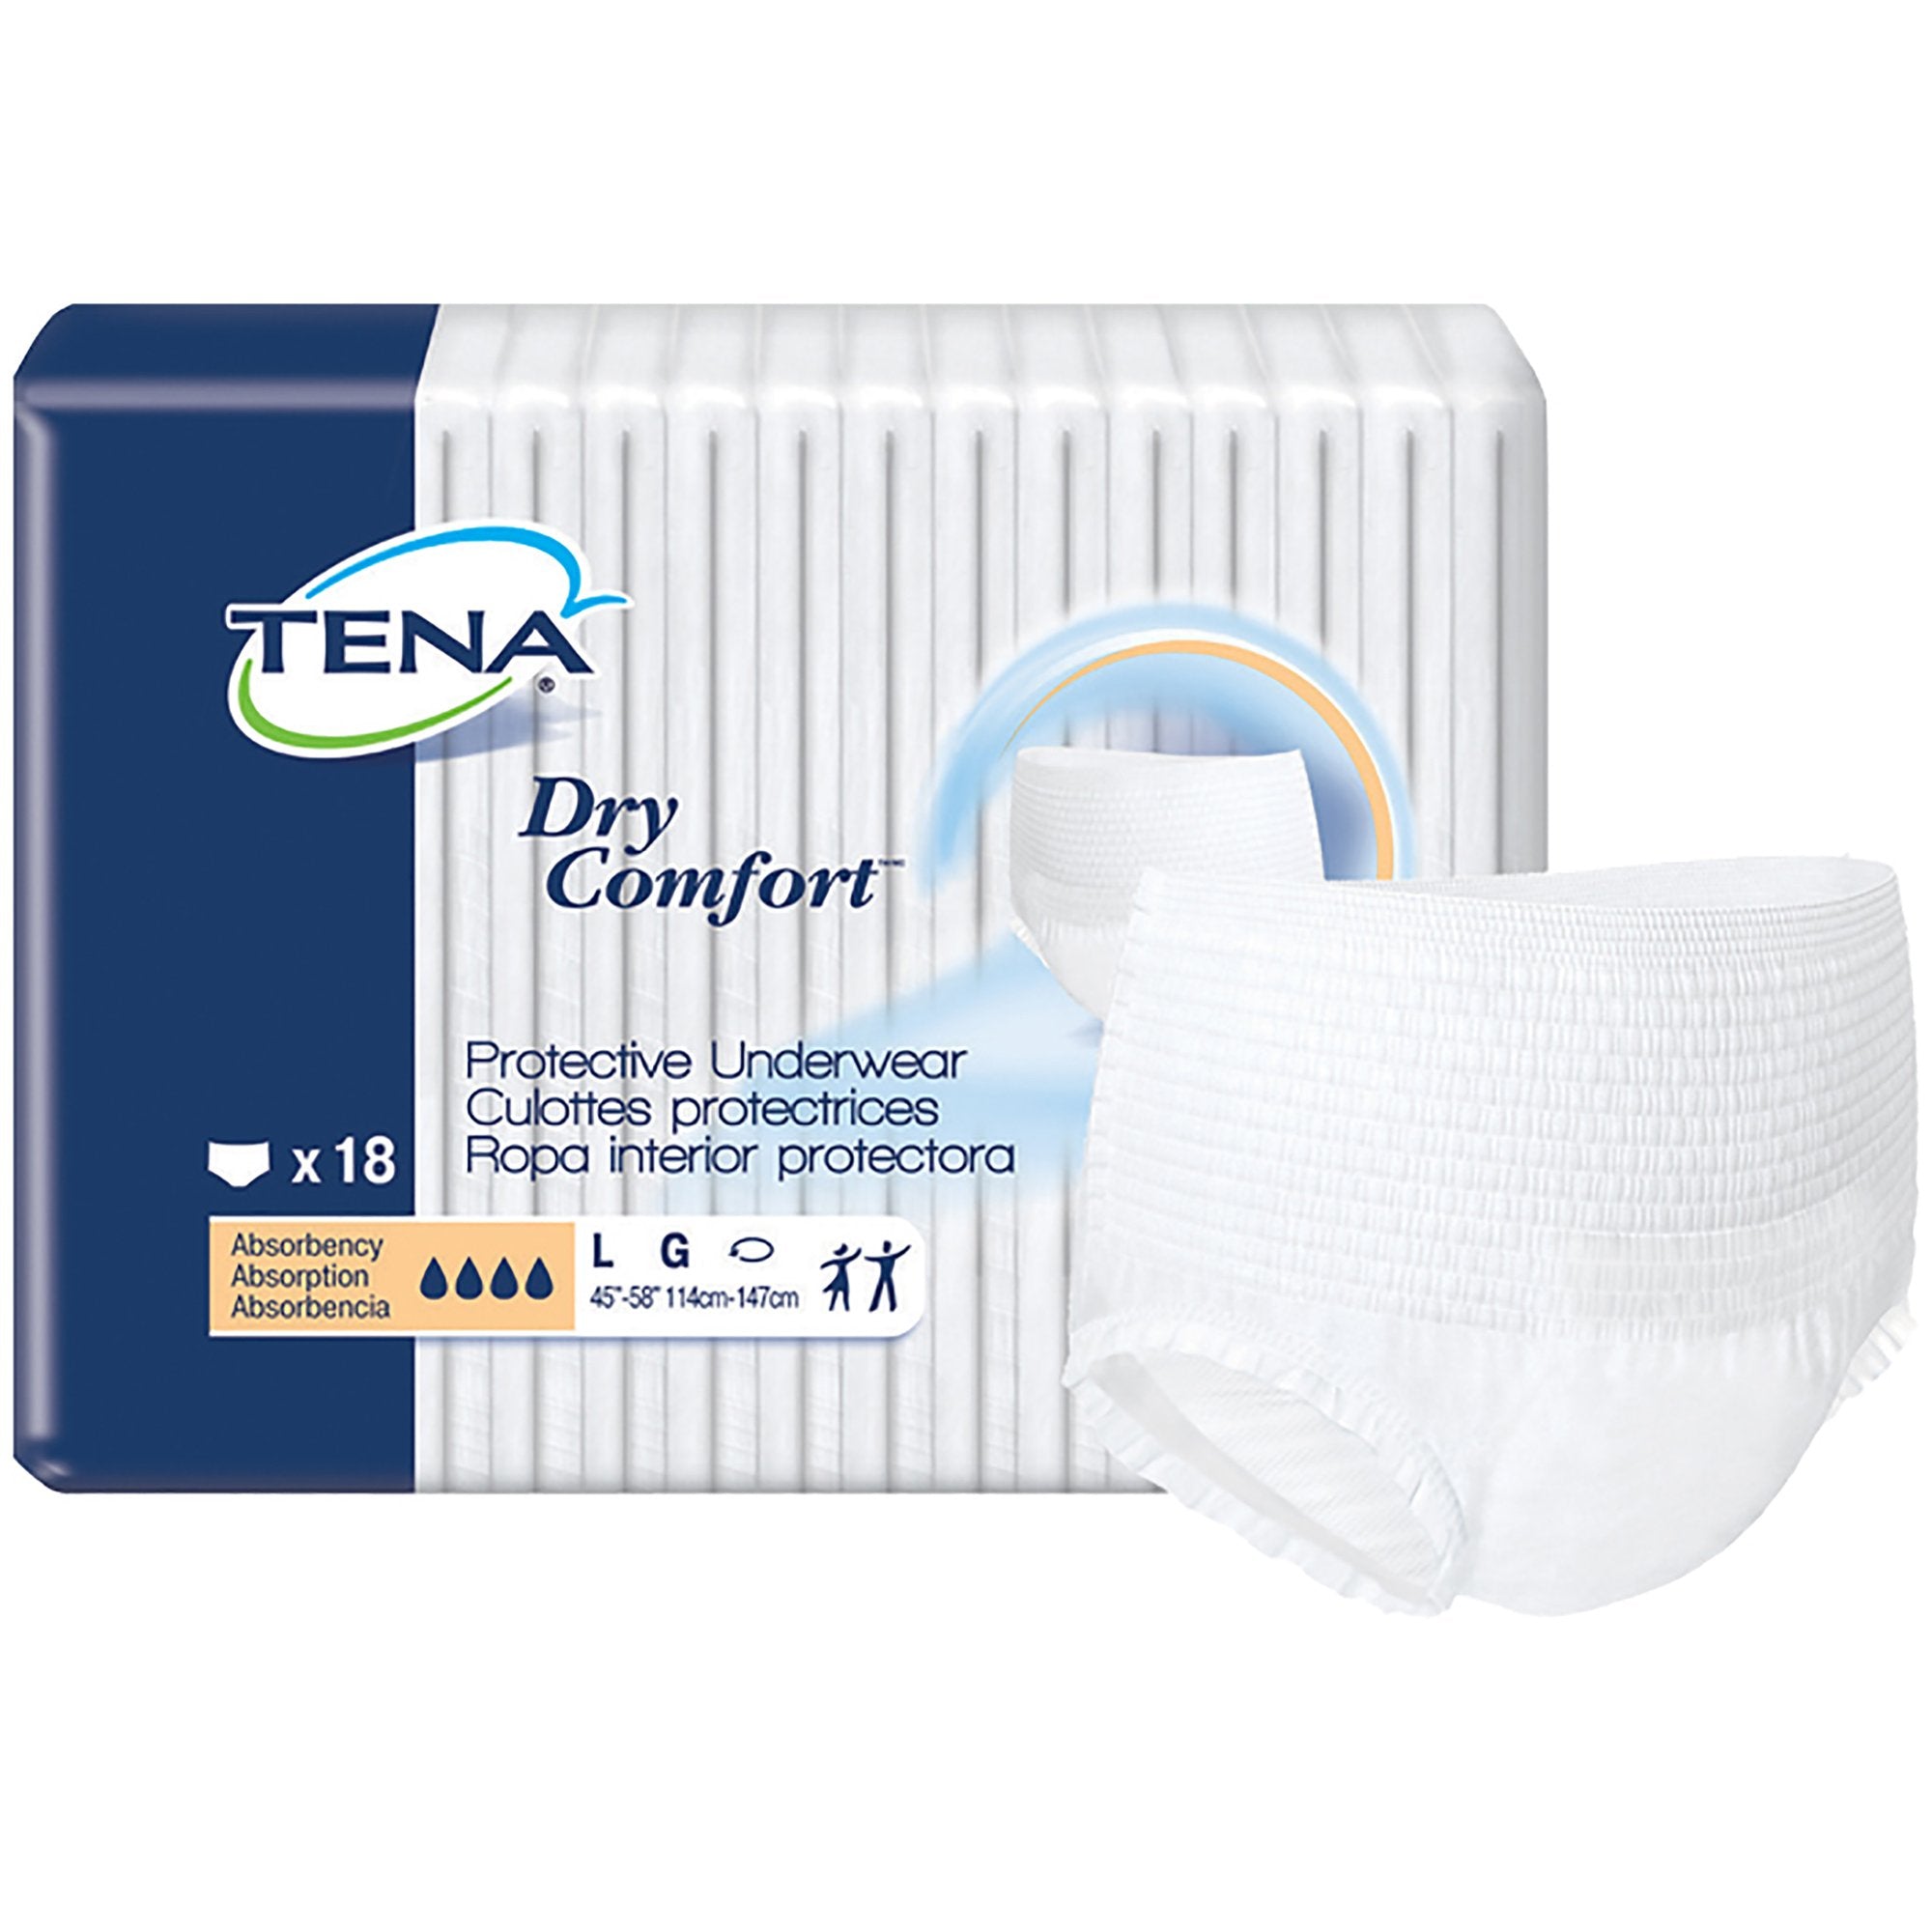 Tena Dry Comfort Absorbent Underwear, Large - Leak Protection (72 Pack)